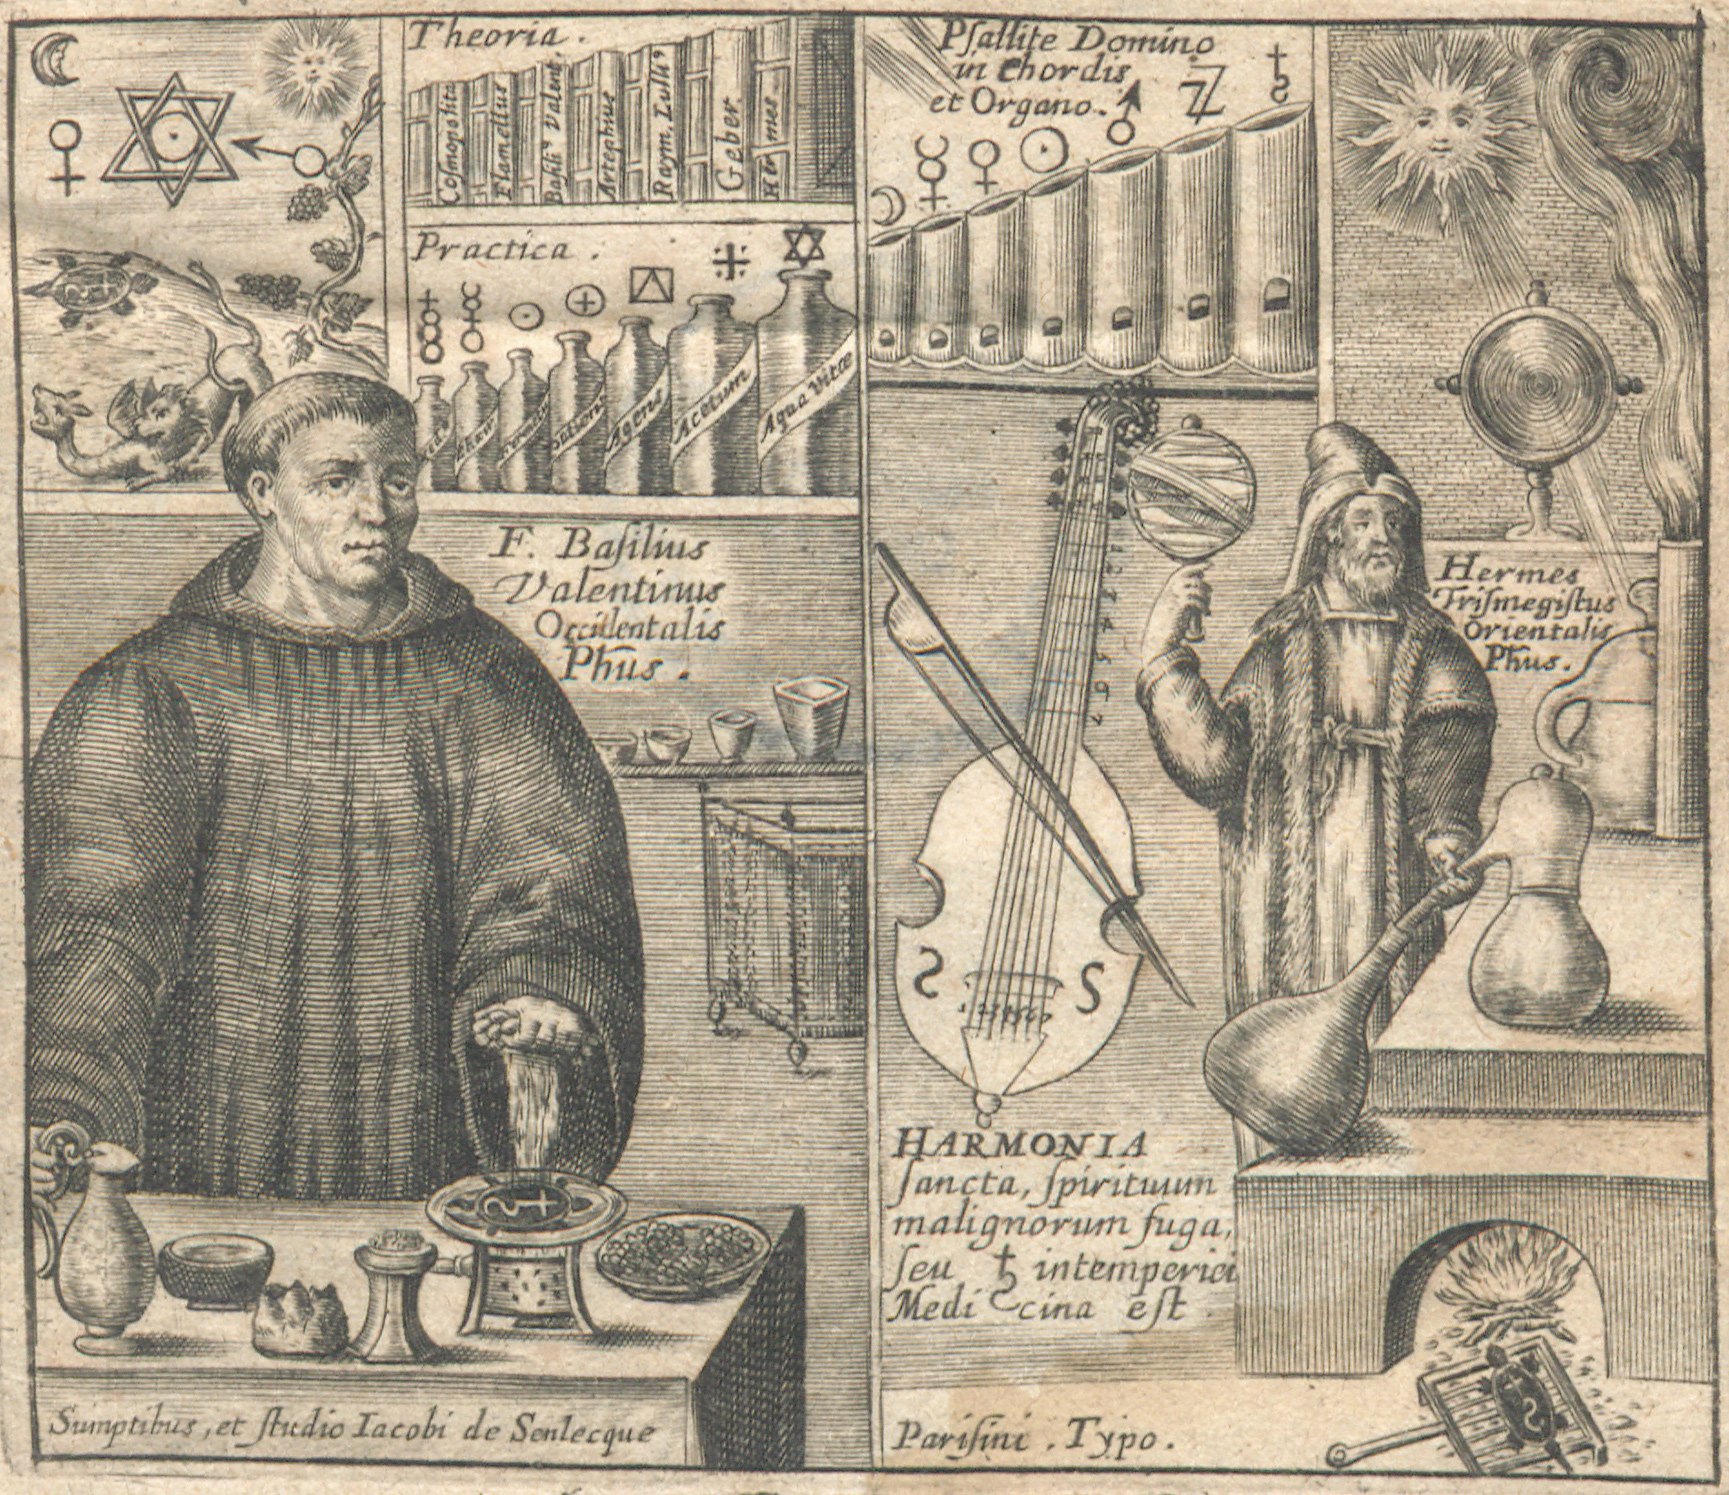 The frontispiece for Revelation des mysteres (Revelation of Mysteries) depicts a split image. On the left-hand side: a robed figure presides over various materials; in the background there are numerous vessels, books, symbols, and a small vignette of mythical creatures. On the right-hand side: A heavily cloaked man in a hat is surrounded by various instruments and experiments in progress.